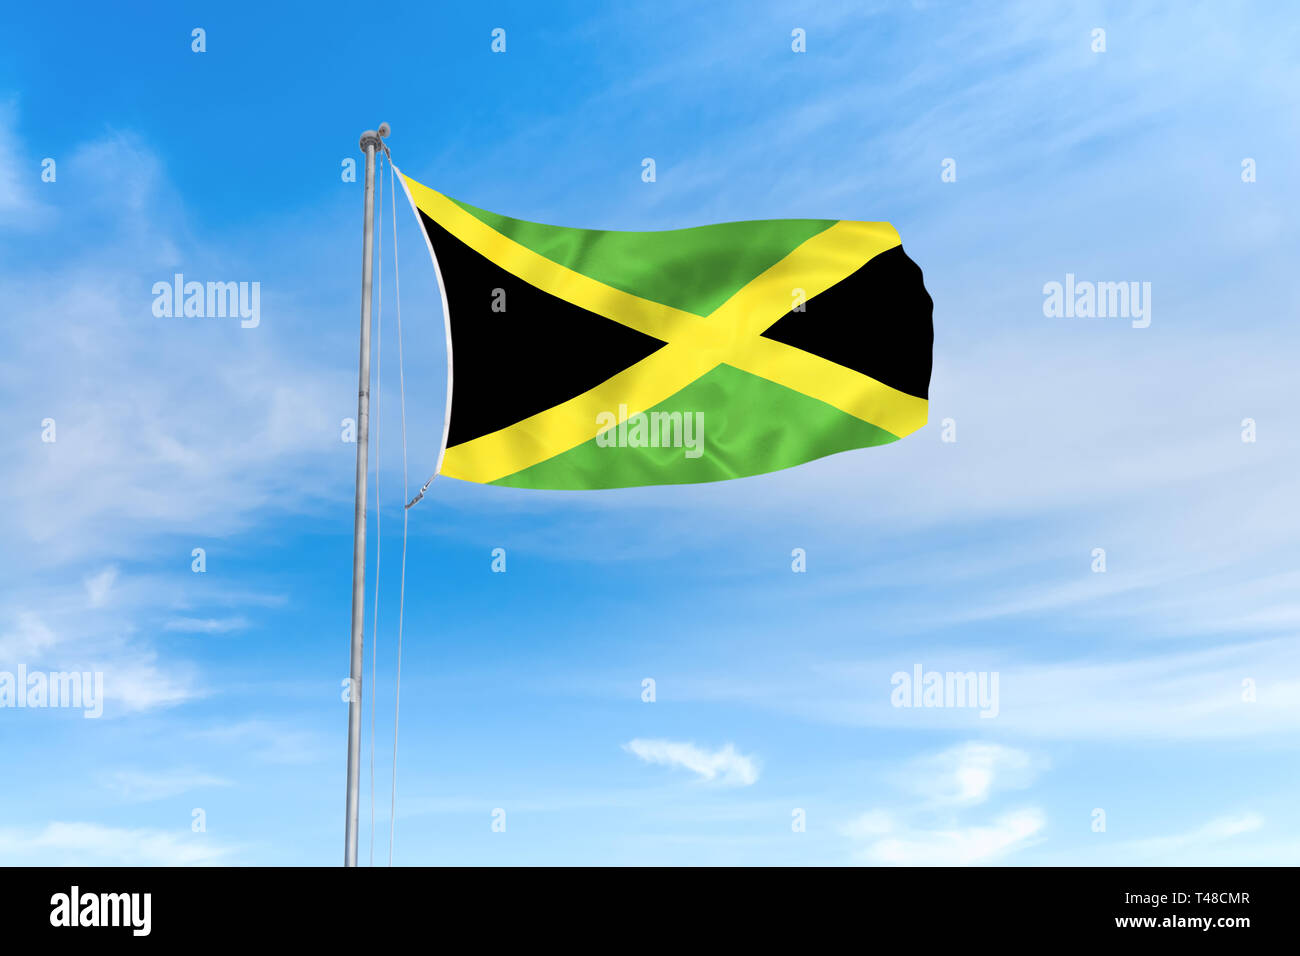 Jamaica flag blowing in the wind over nice blue sky background Stock Photo